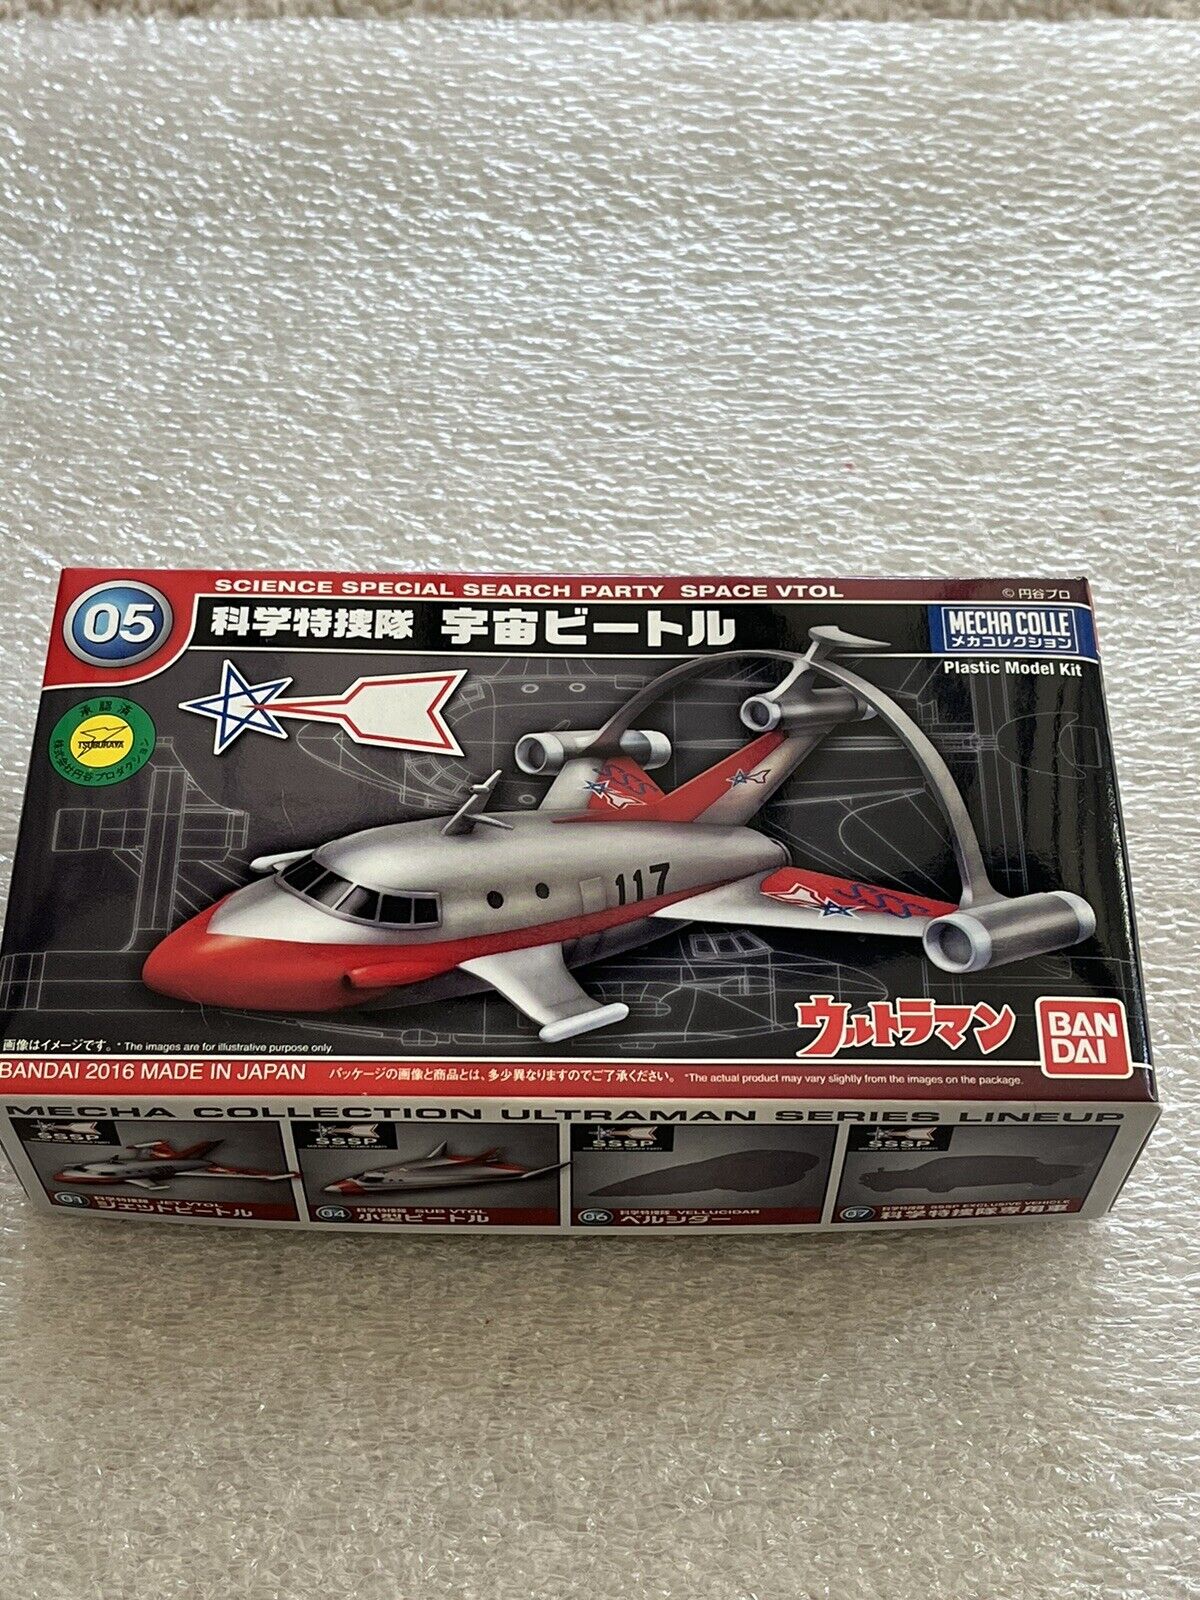 BANDAI Mecha Colle Ultraman Science Special Search Party SPACE VTOL Model Kit